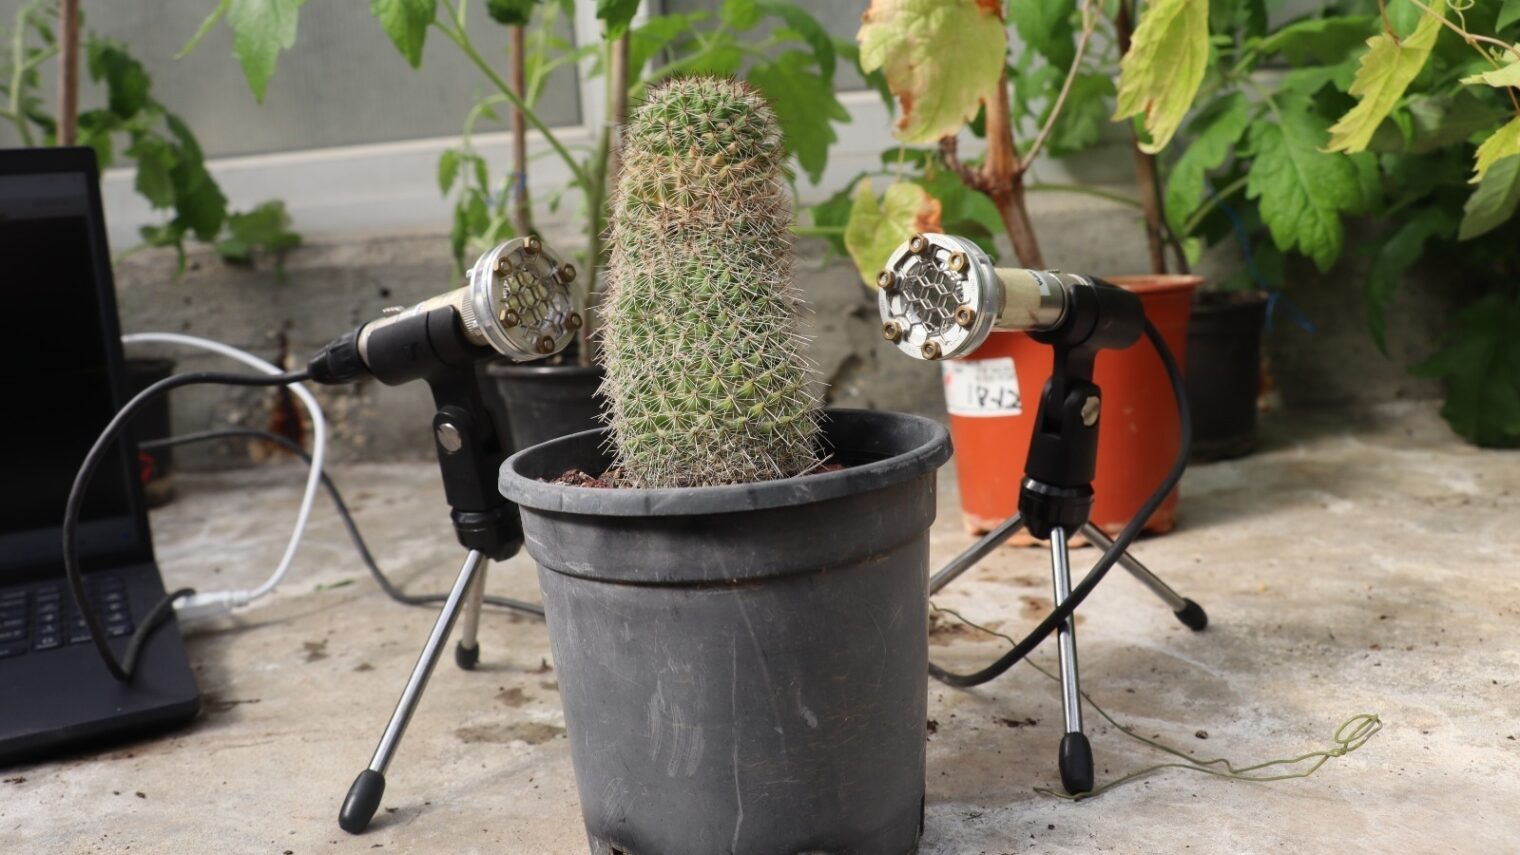 Microphone picking up sounds from a cactus plant. Photo courtesy of Tel Aviv University